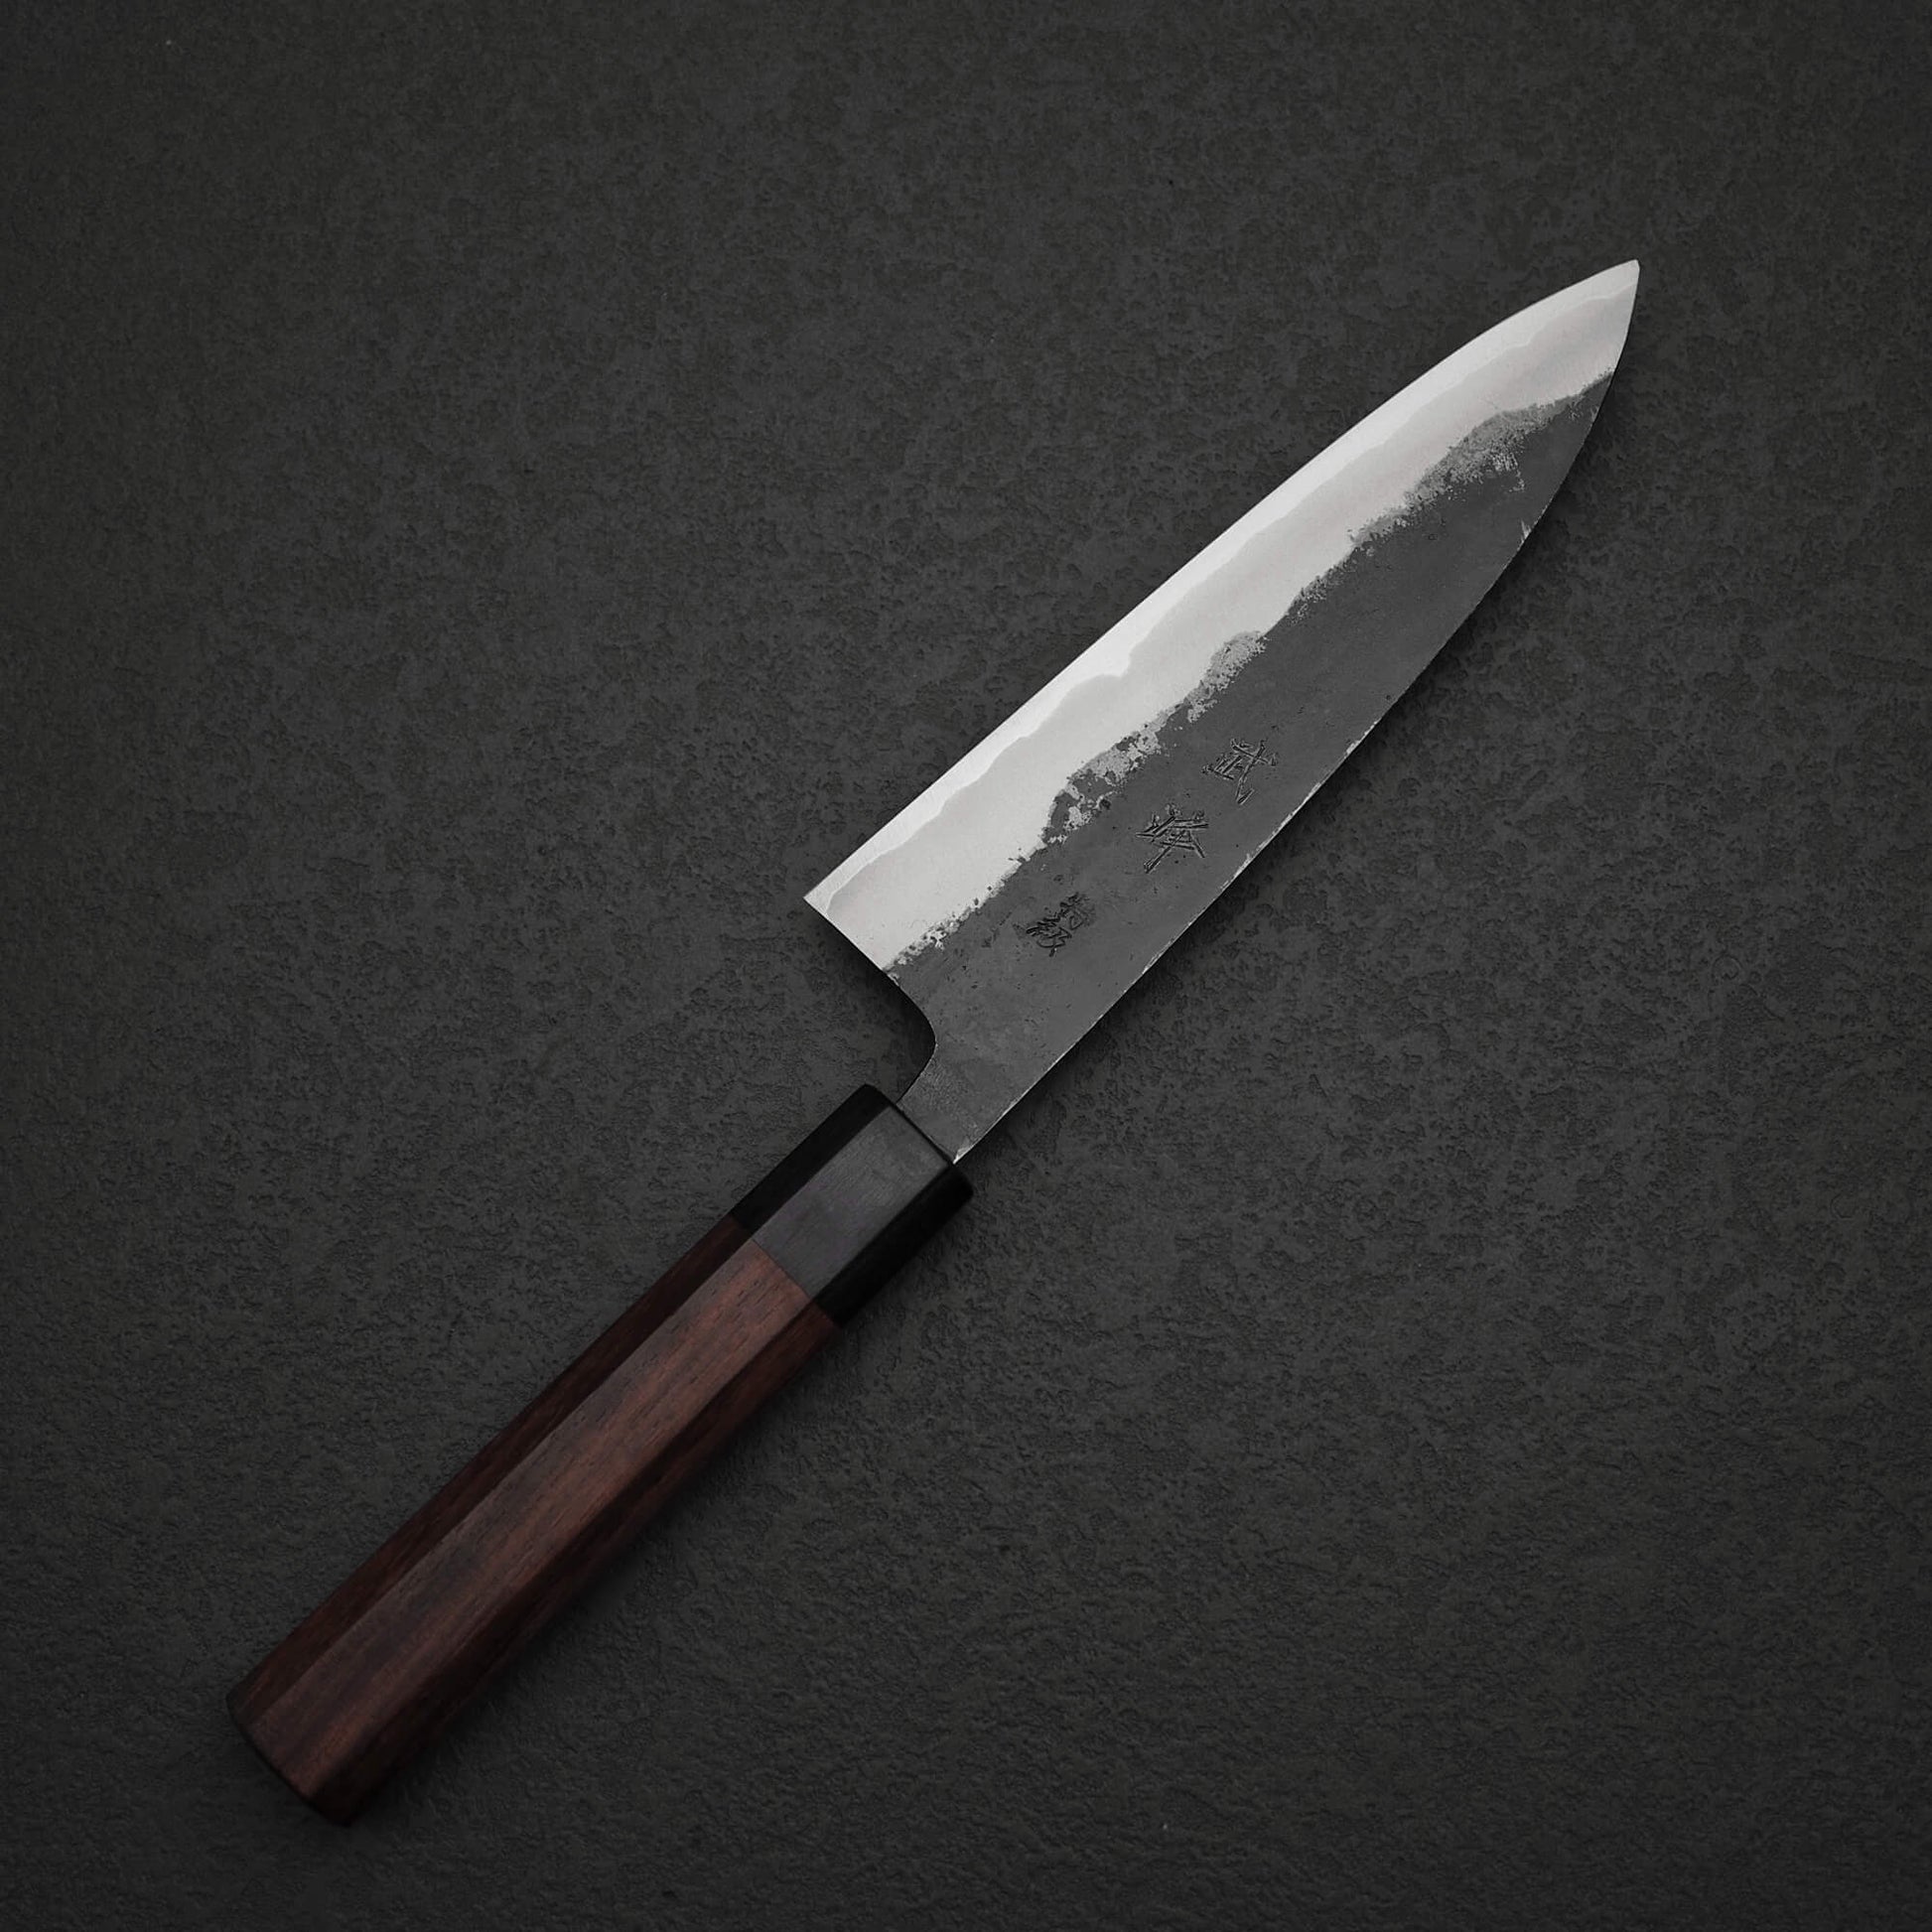 Top view of Murata Buho kurouchi aogami#1 funayuki knife. Image shows the left side of the knife.